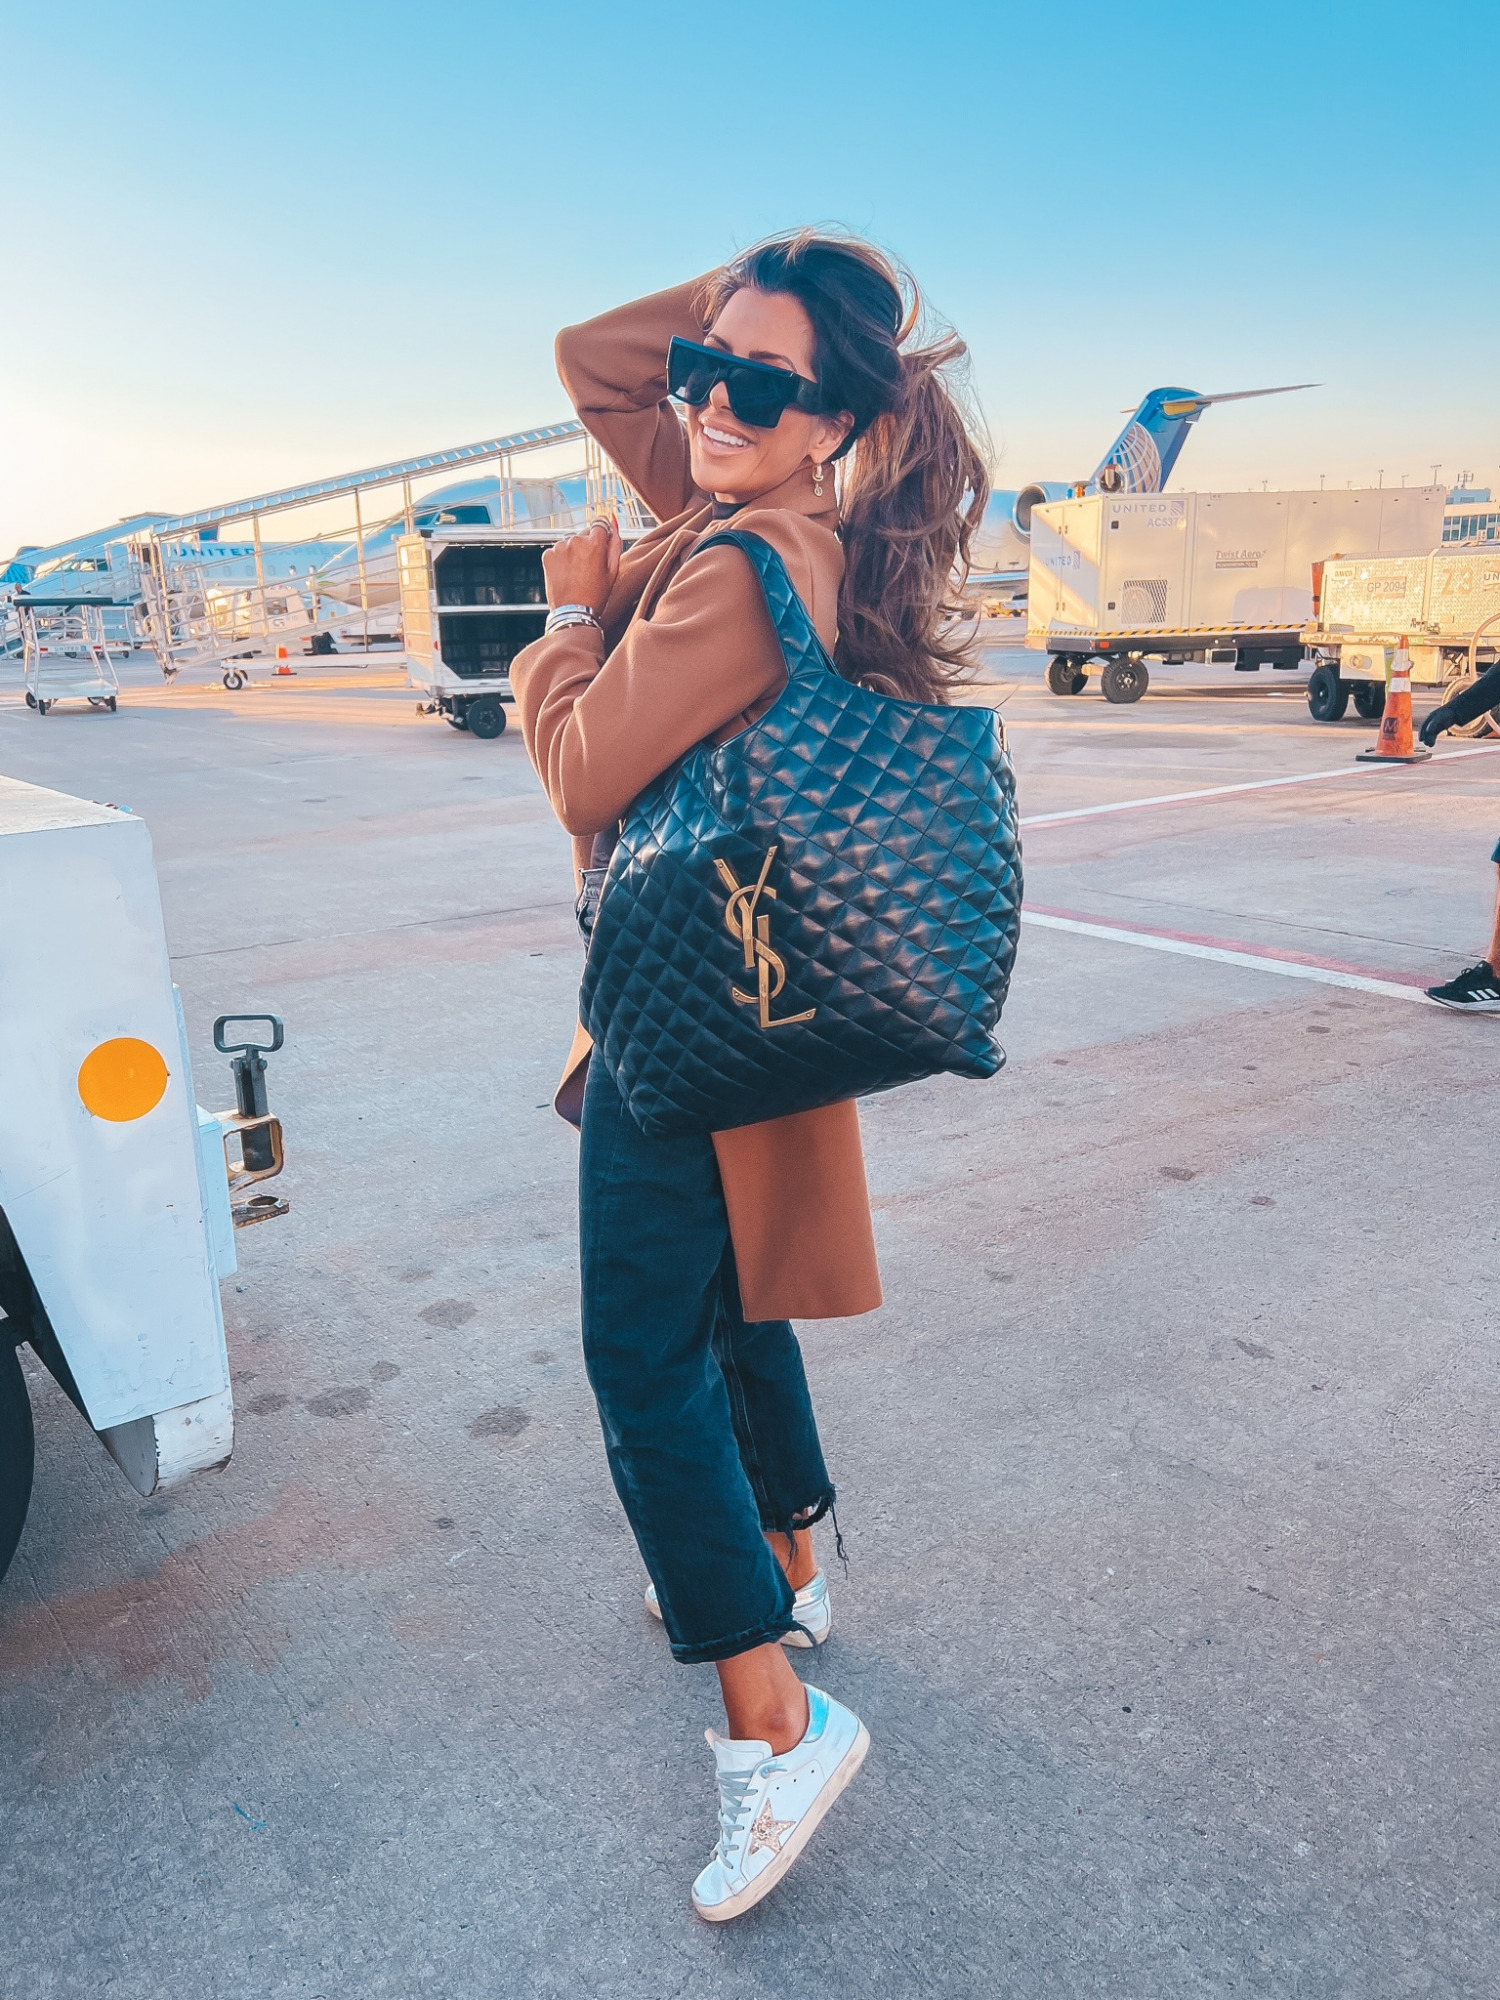 Saint Laurent ICare Extra Large Embellished Quilted Leather Tote, Celine 60mm Flat Top Sunglasses, Emily Gemma Airport Outfit, Travel Fashion 2022